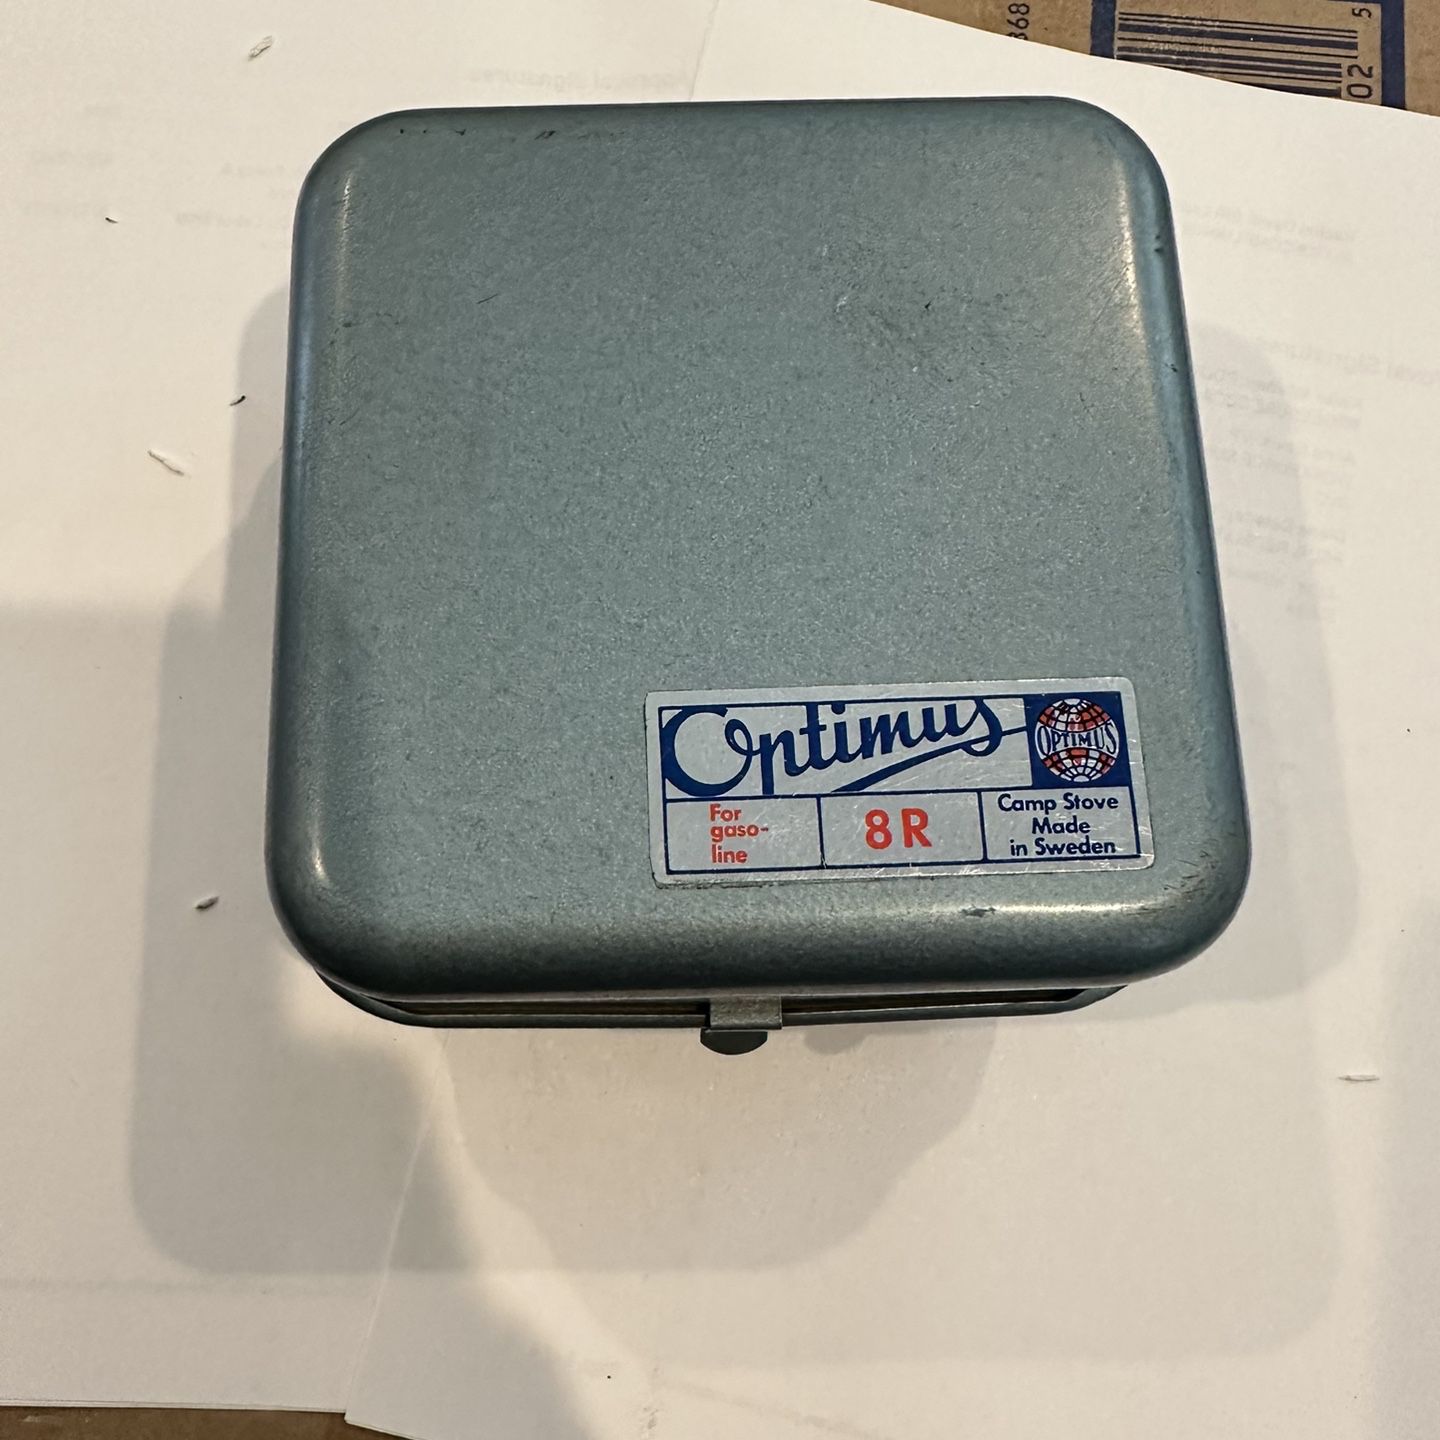 Optimus 8R Vintage Camp Stove for Sale in San Diego, CA - OfferUp